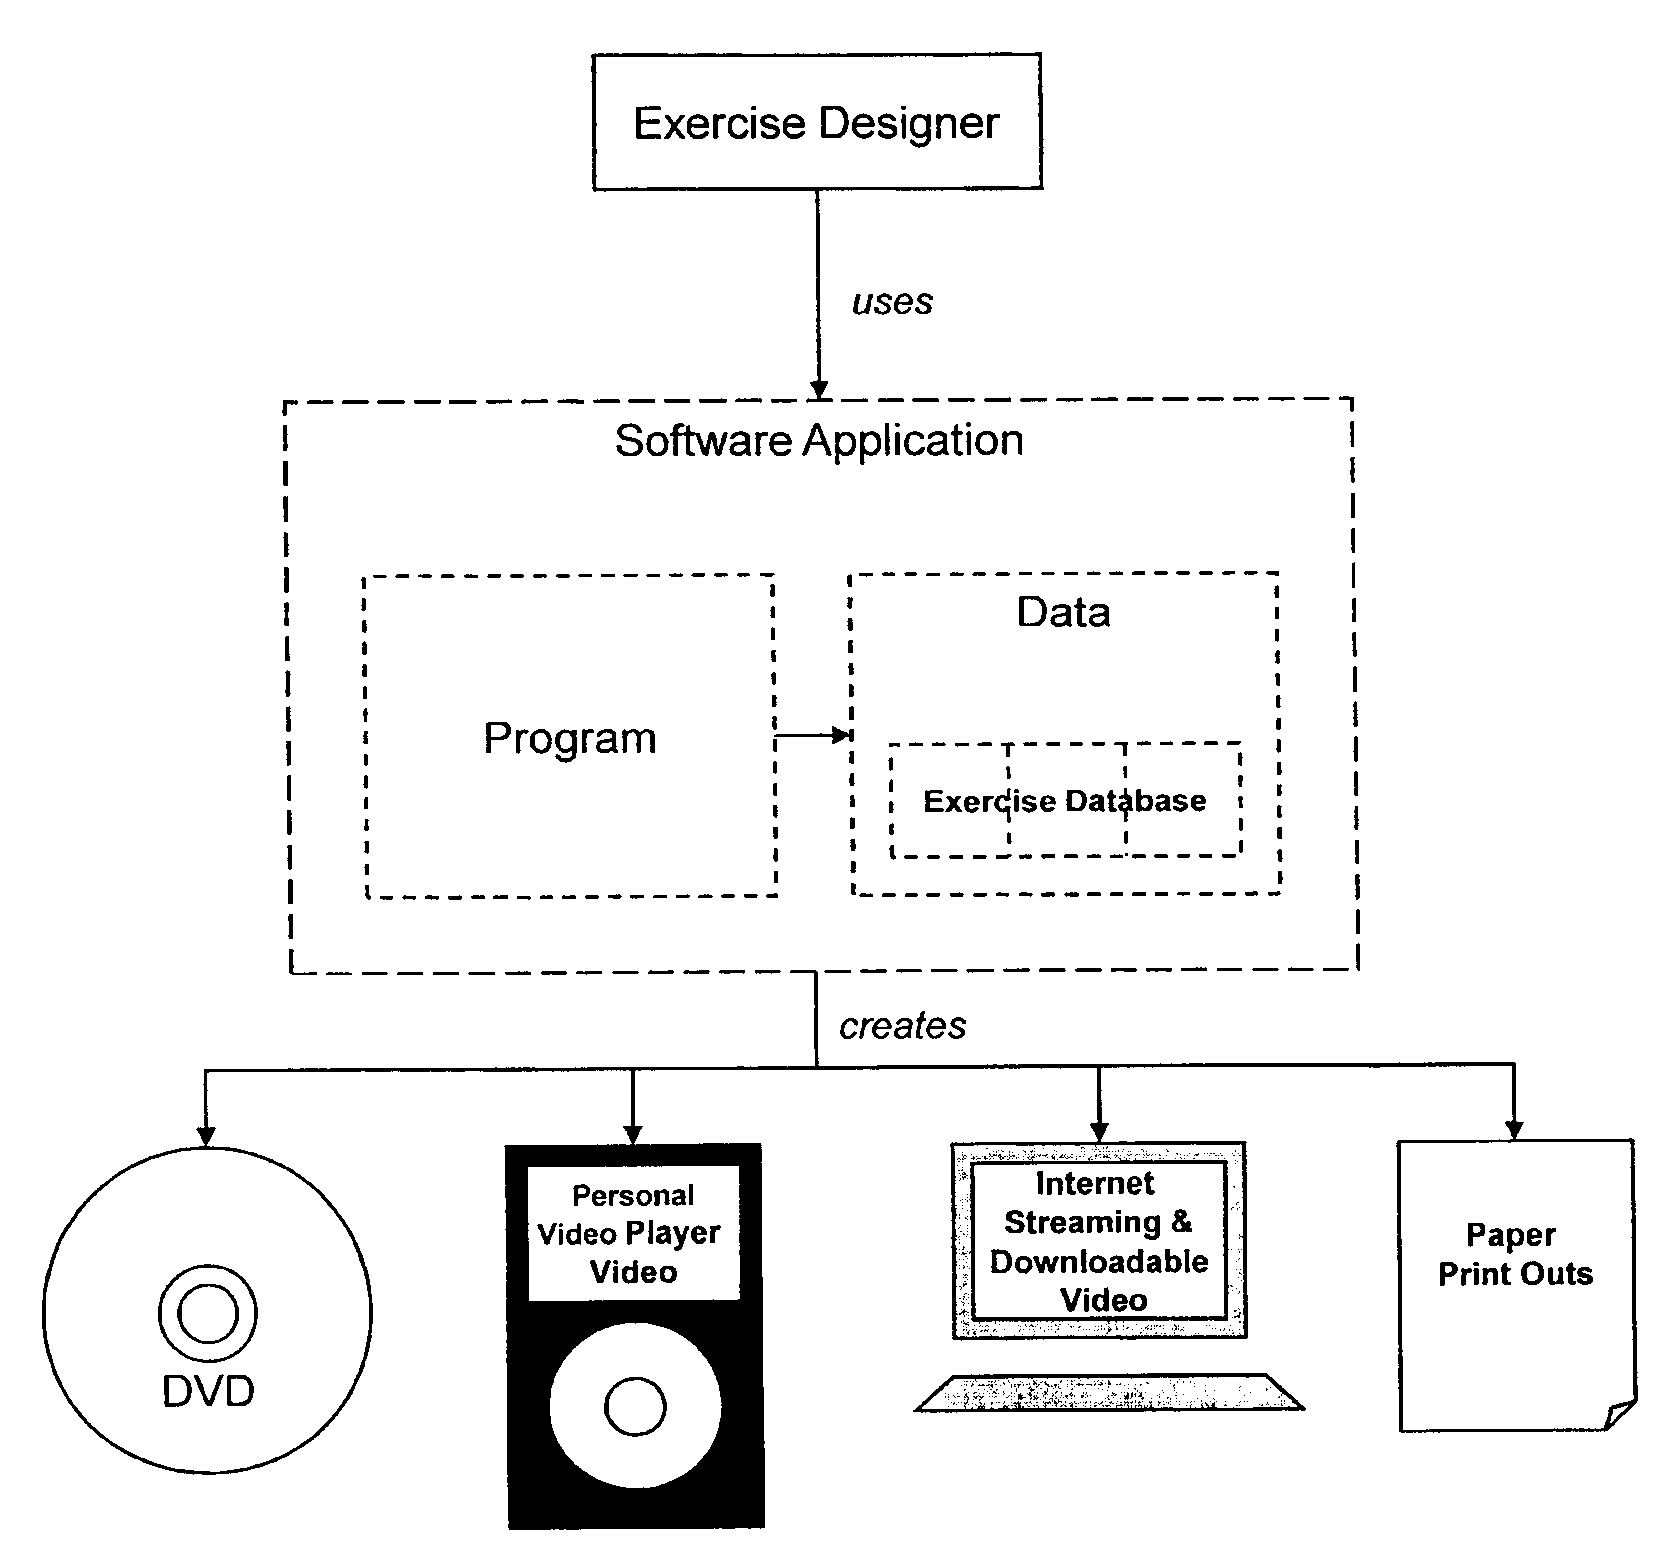 Method of Developing and Creating a Personalized Exercise Regime in a Digital Medium